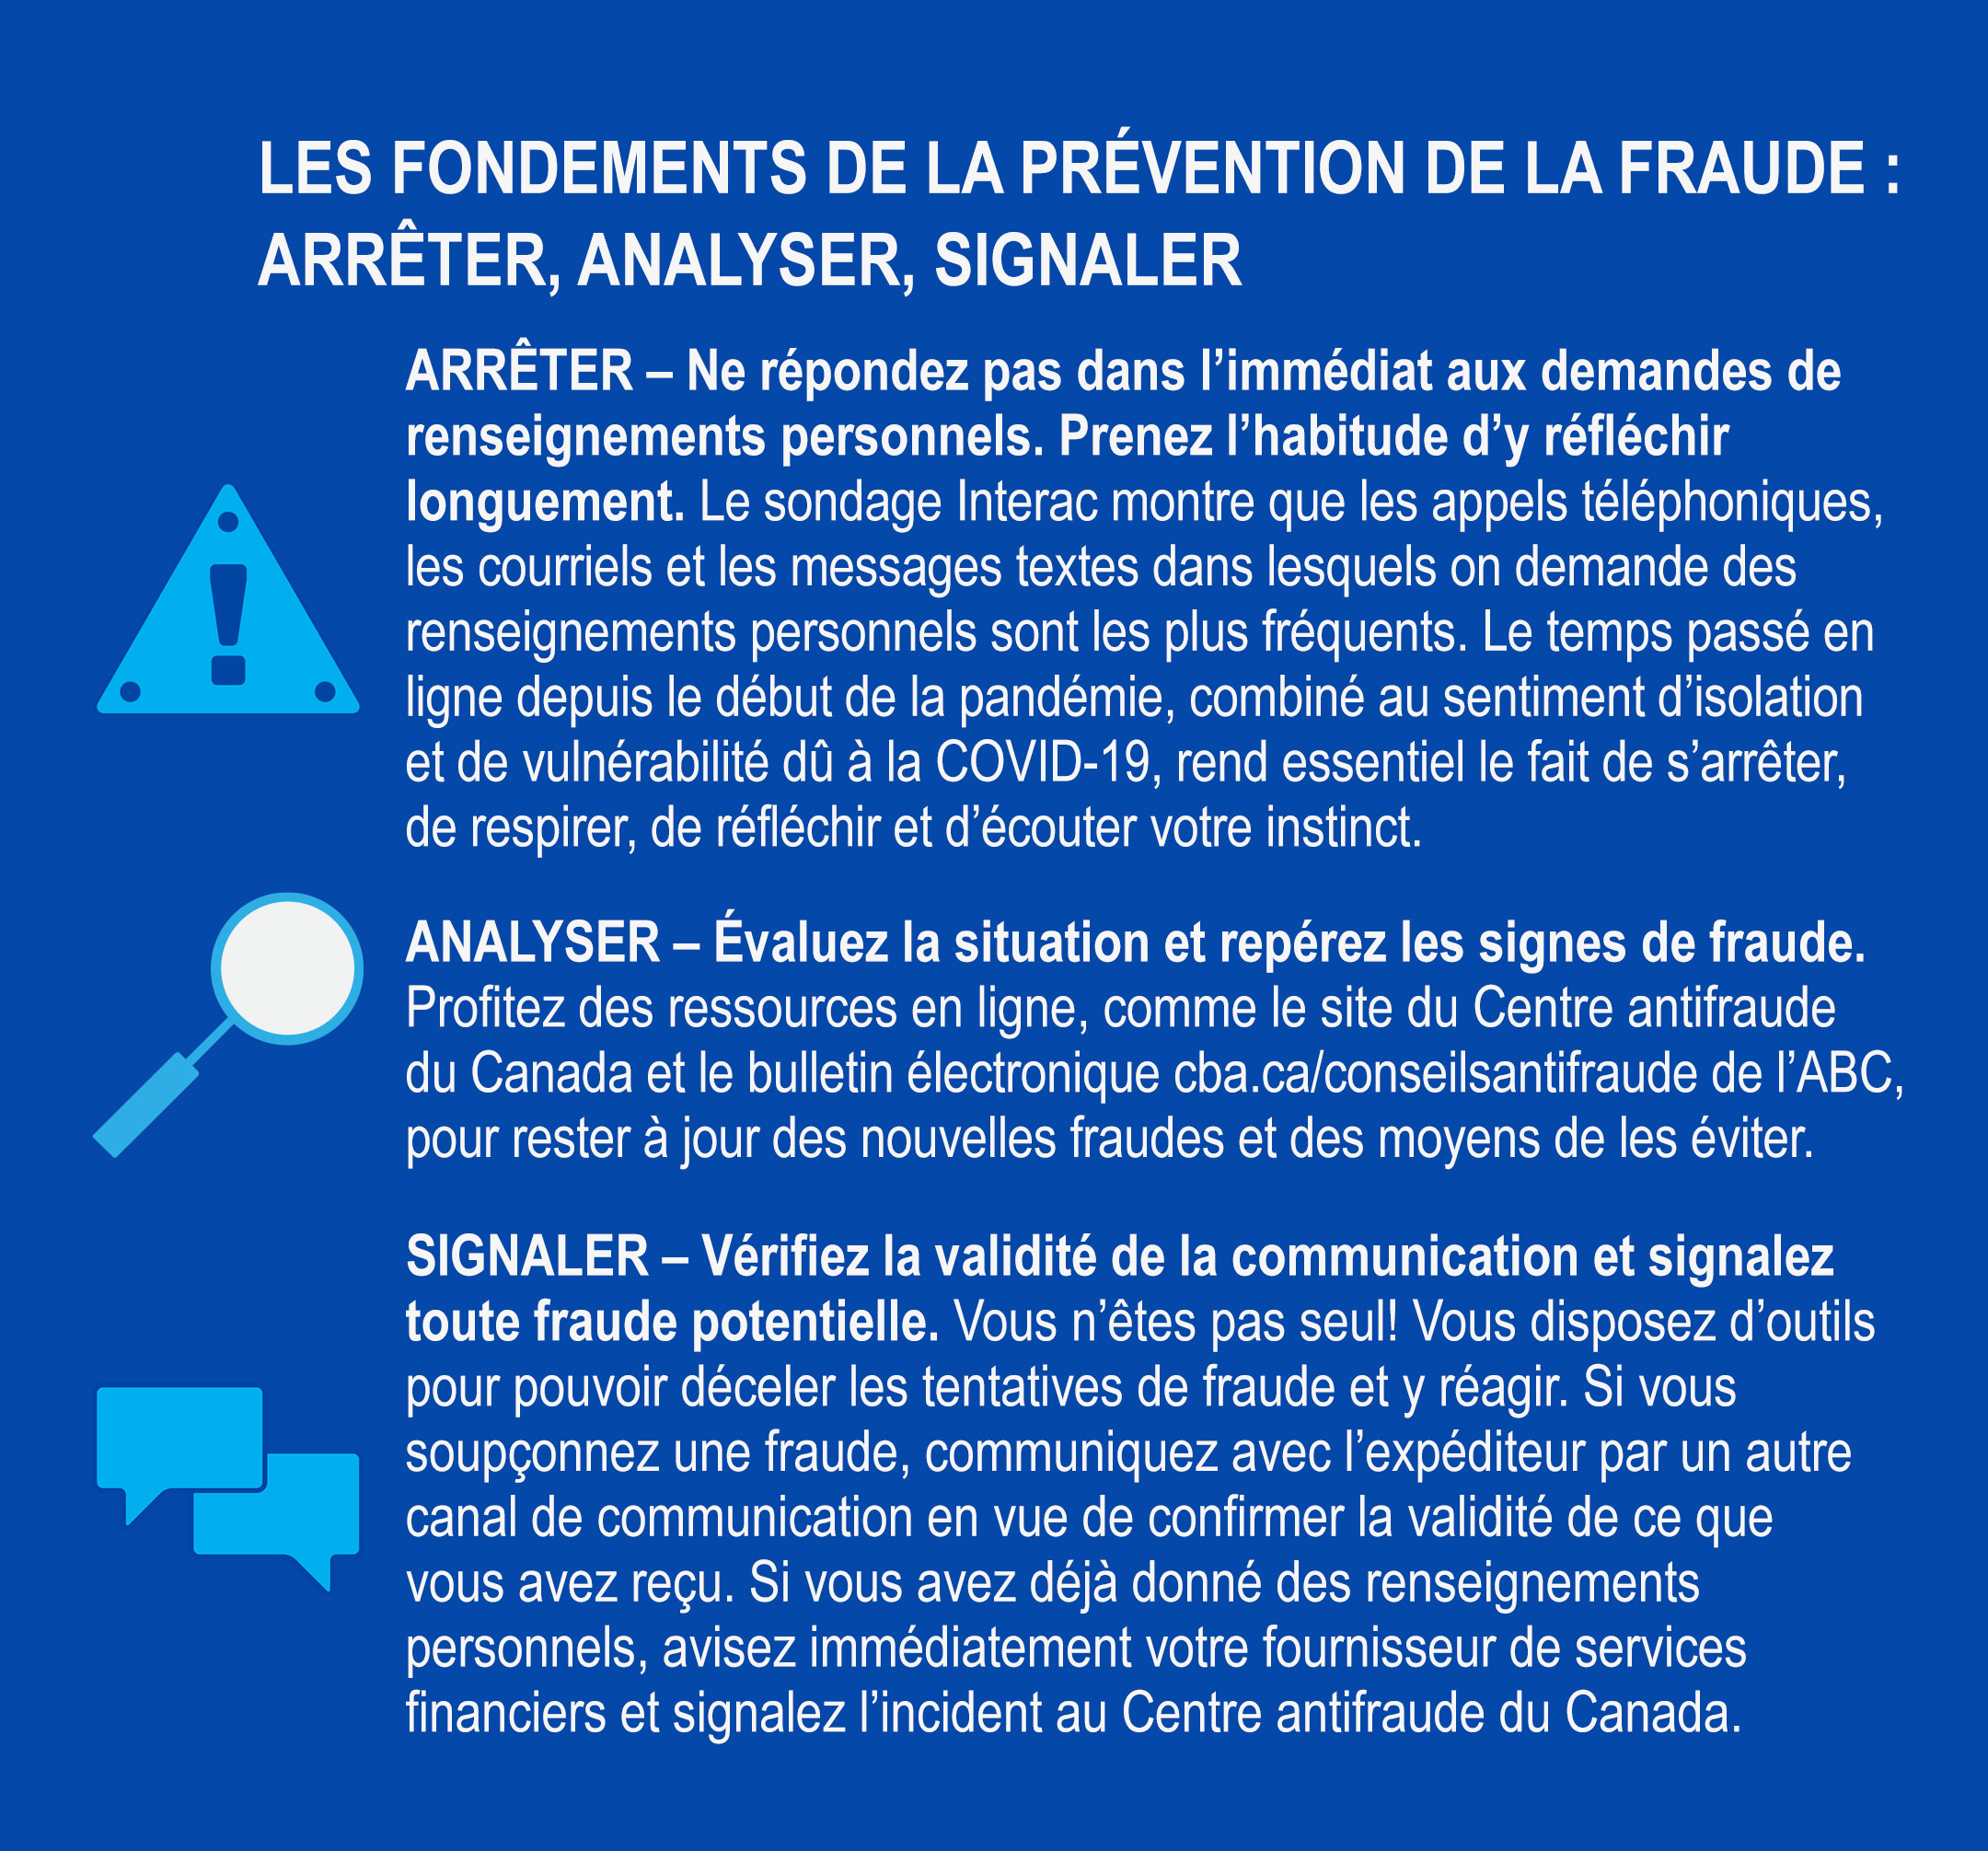 fraud prevention 101 tips... the image text is included in the next section below the image